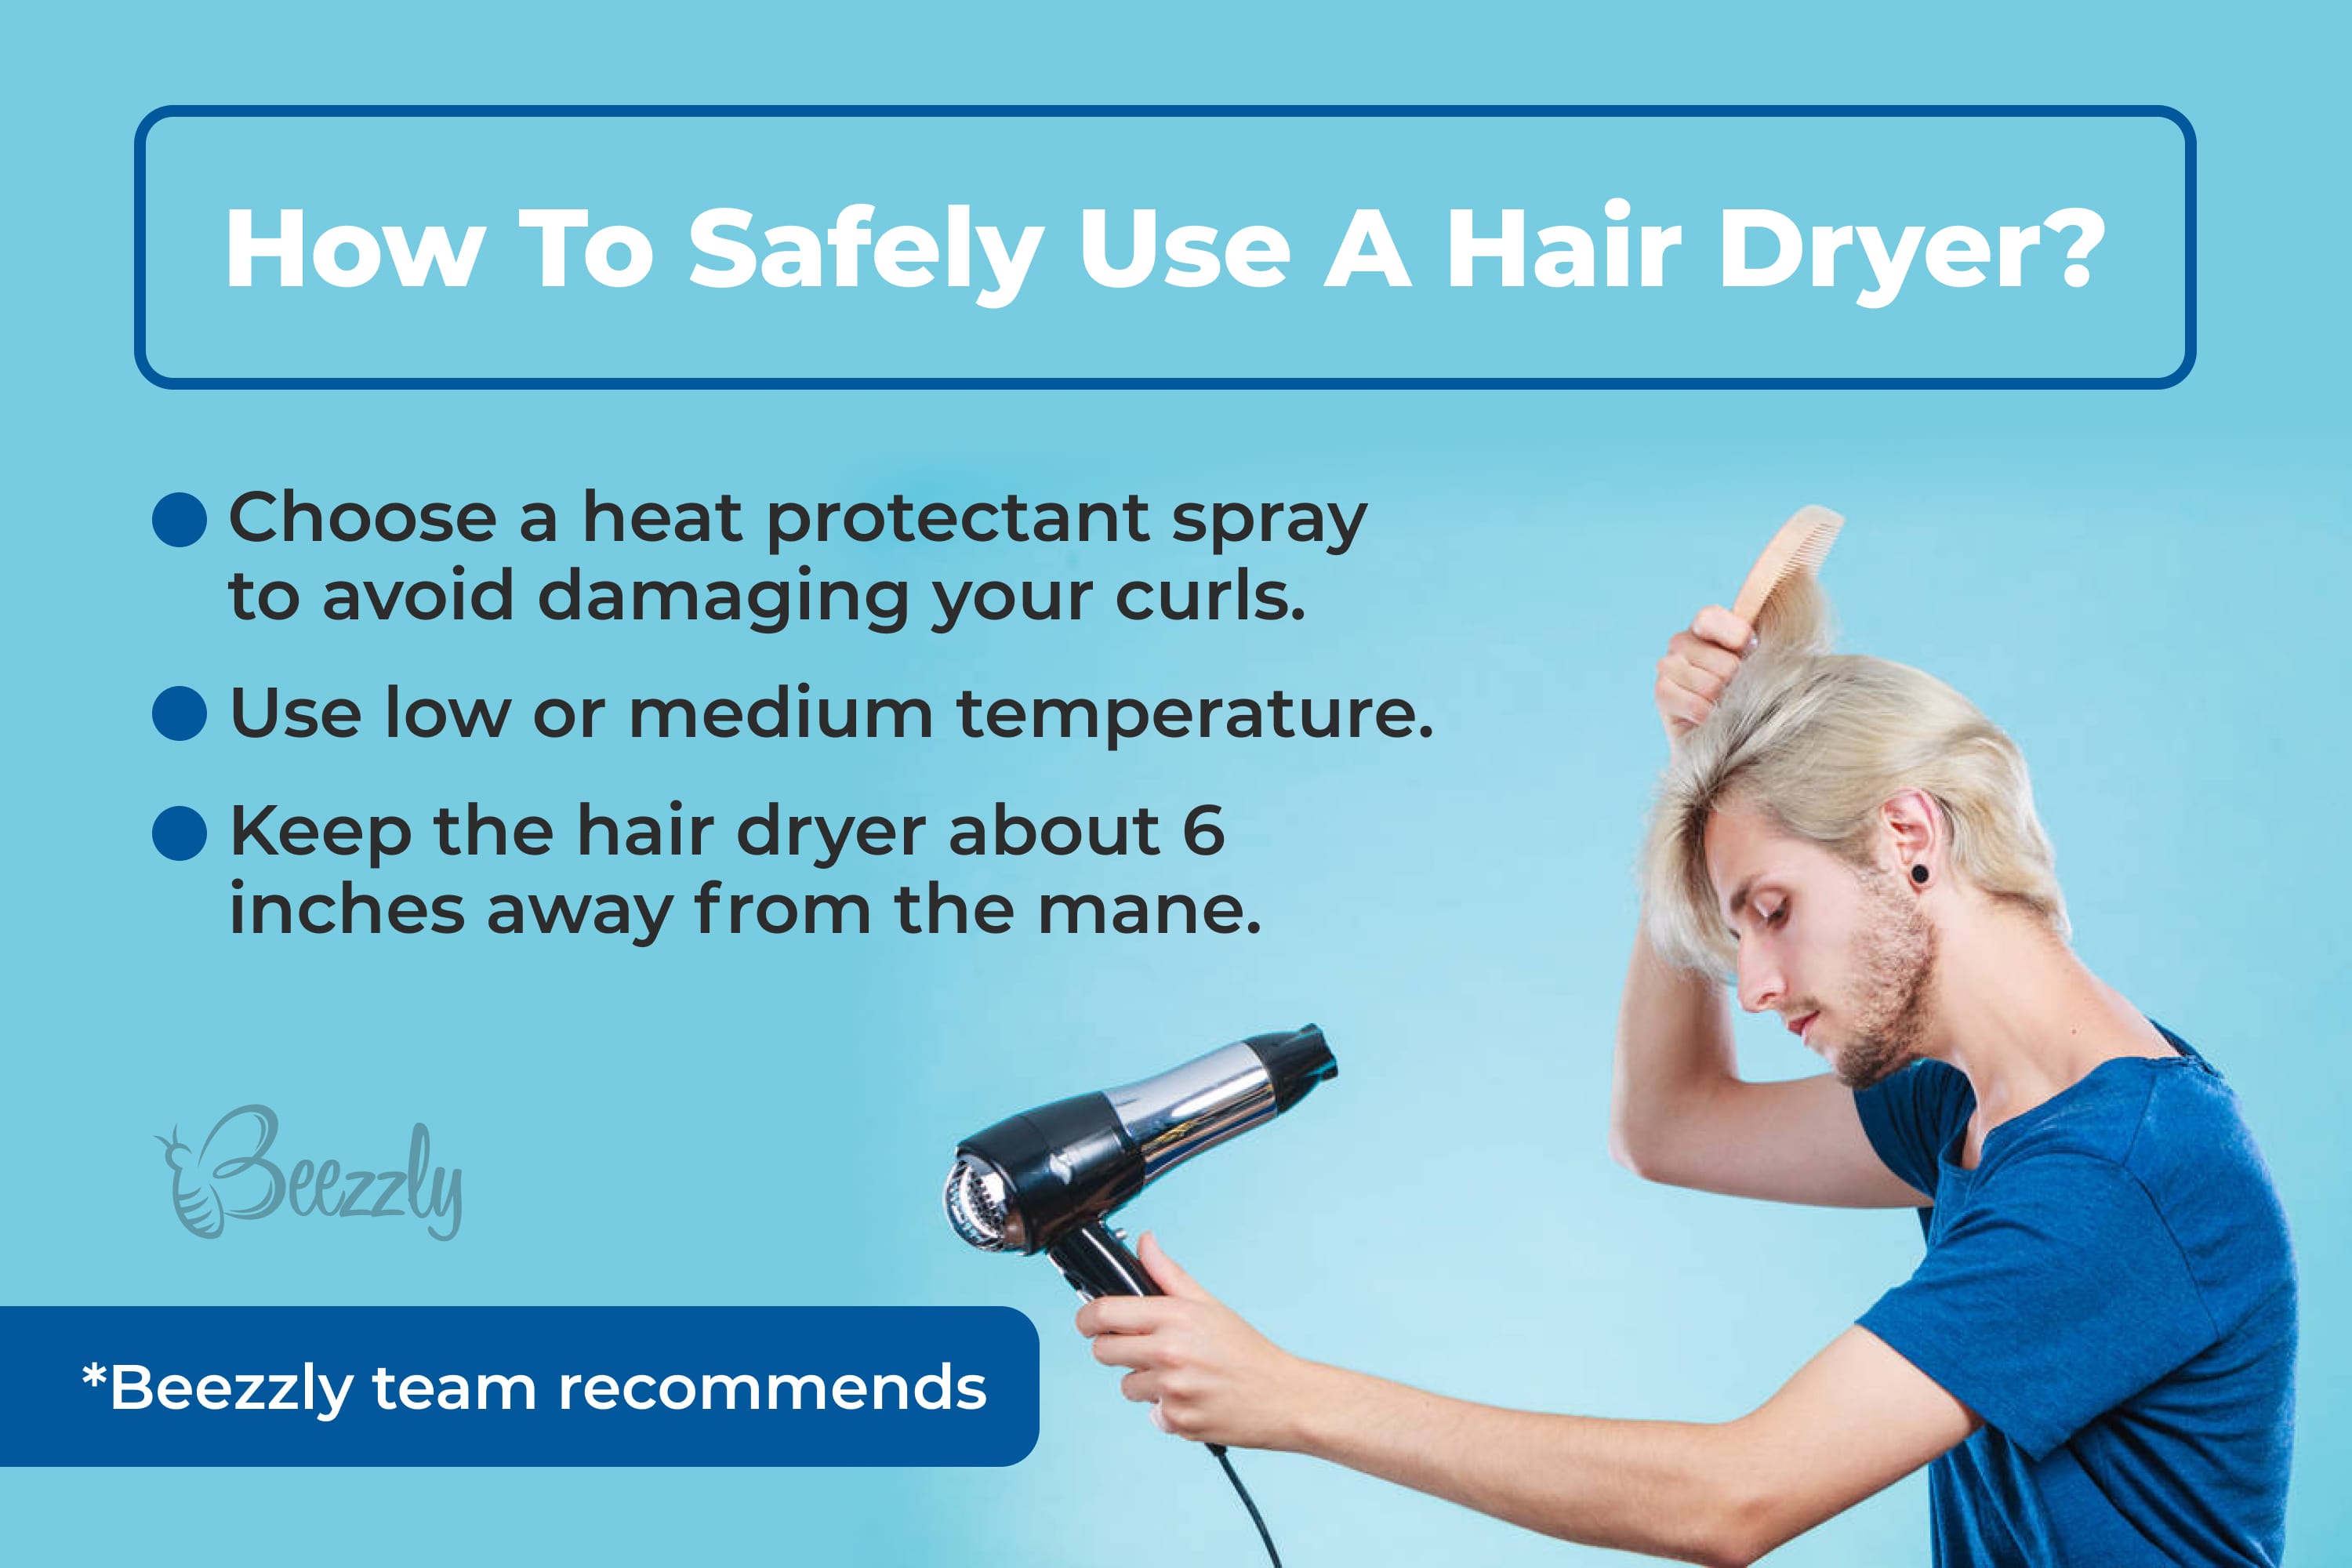 How to safely use a hair dryer